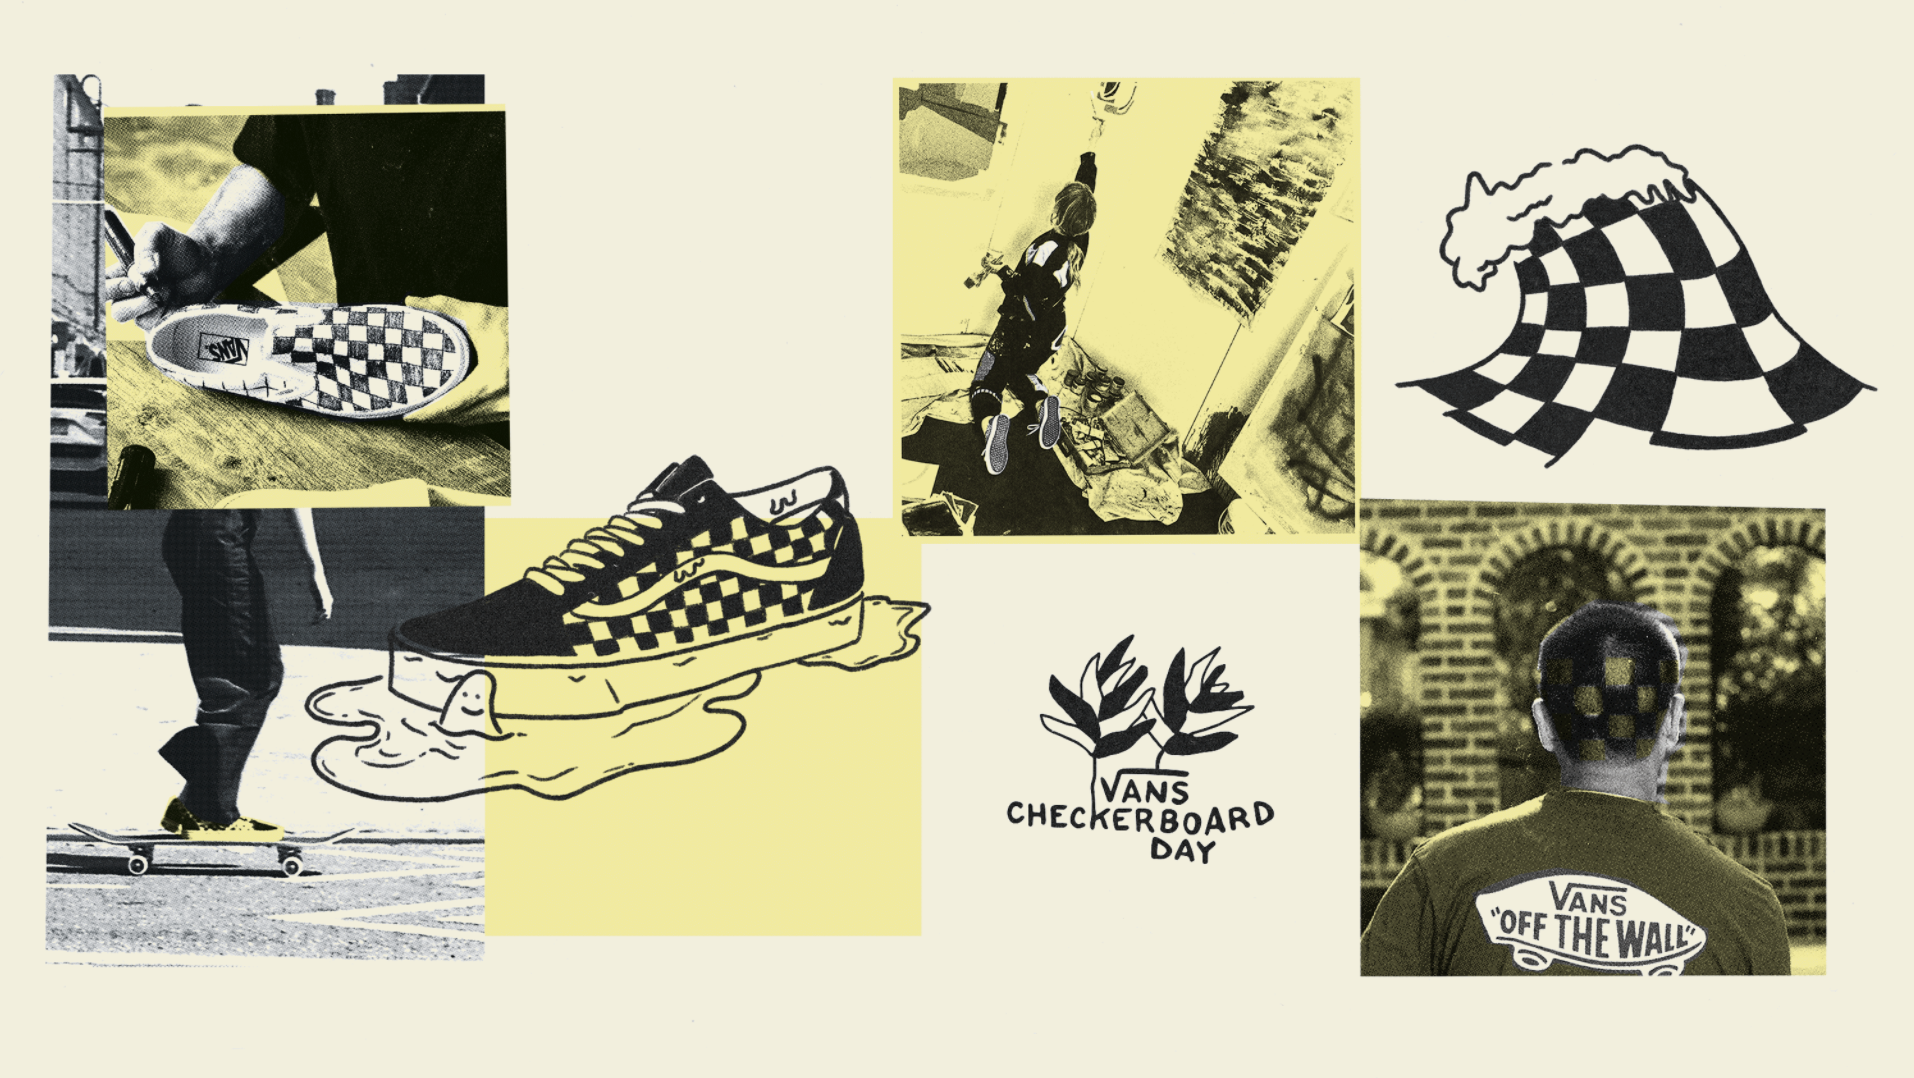 Vans Checkerboard Day Most Robust Campaign as Art Director